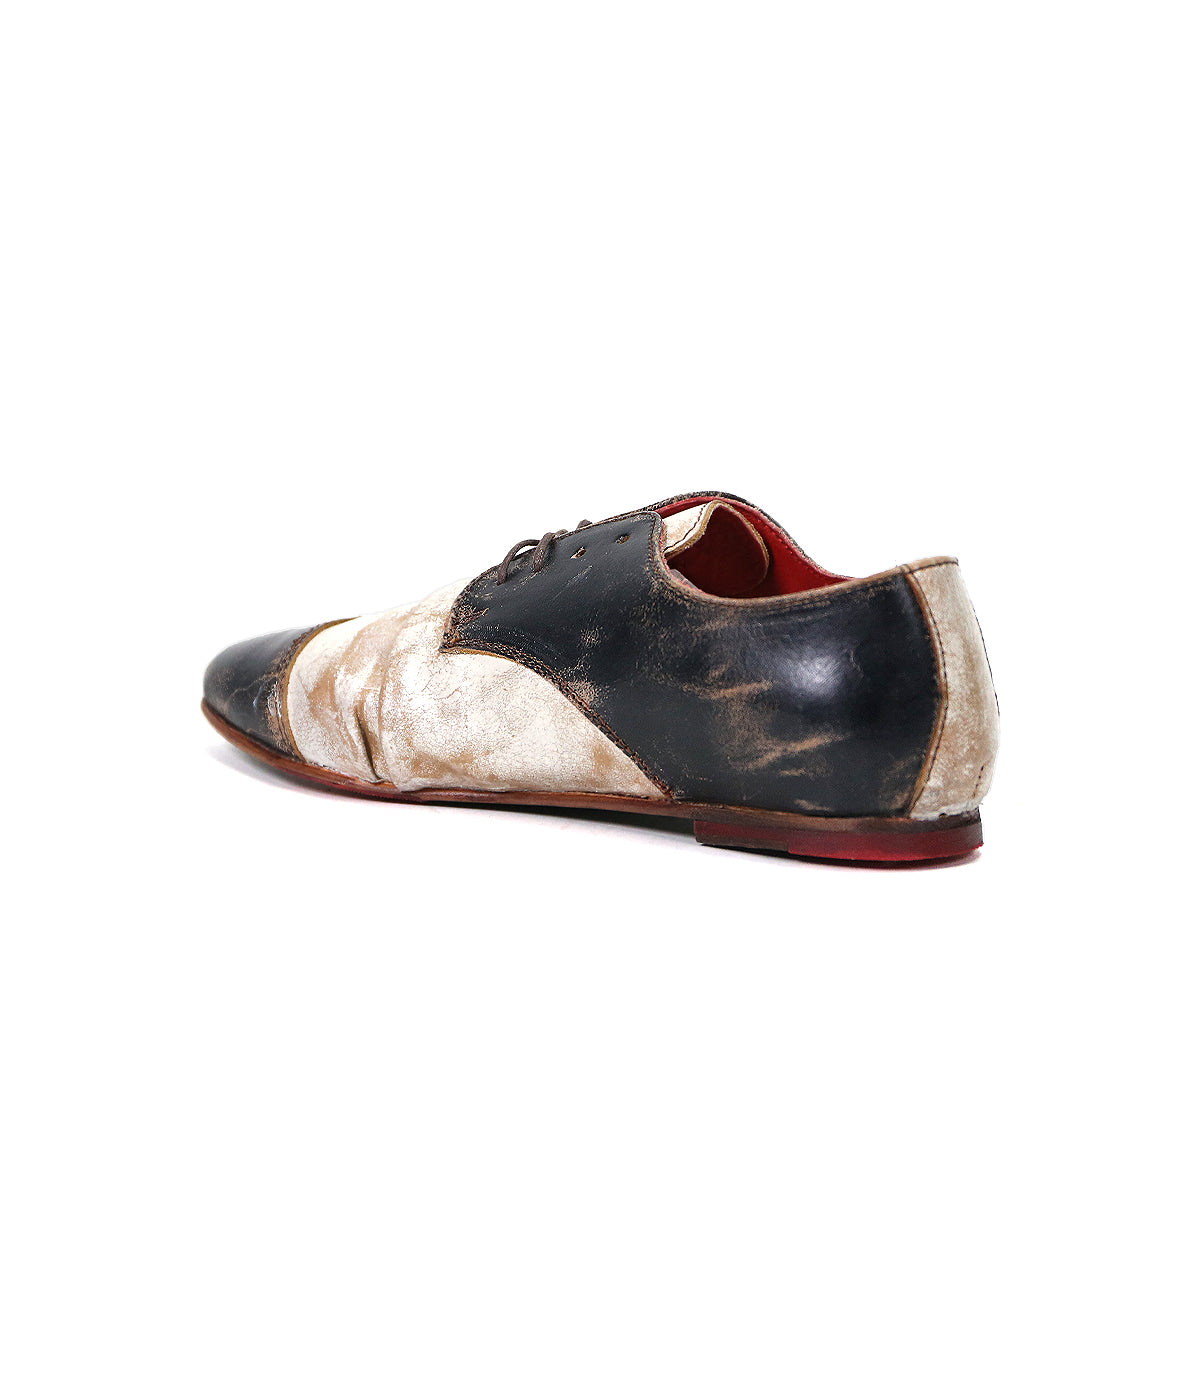 A single worn-out, two-toned leather wingtip shoe with black laces and a red sole, isolated against a white background by Bed Stu Rumba II.